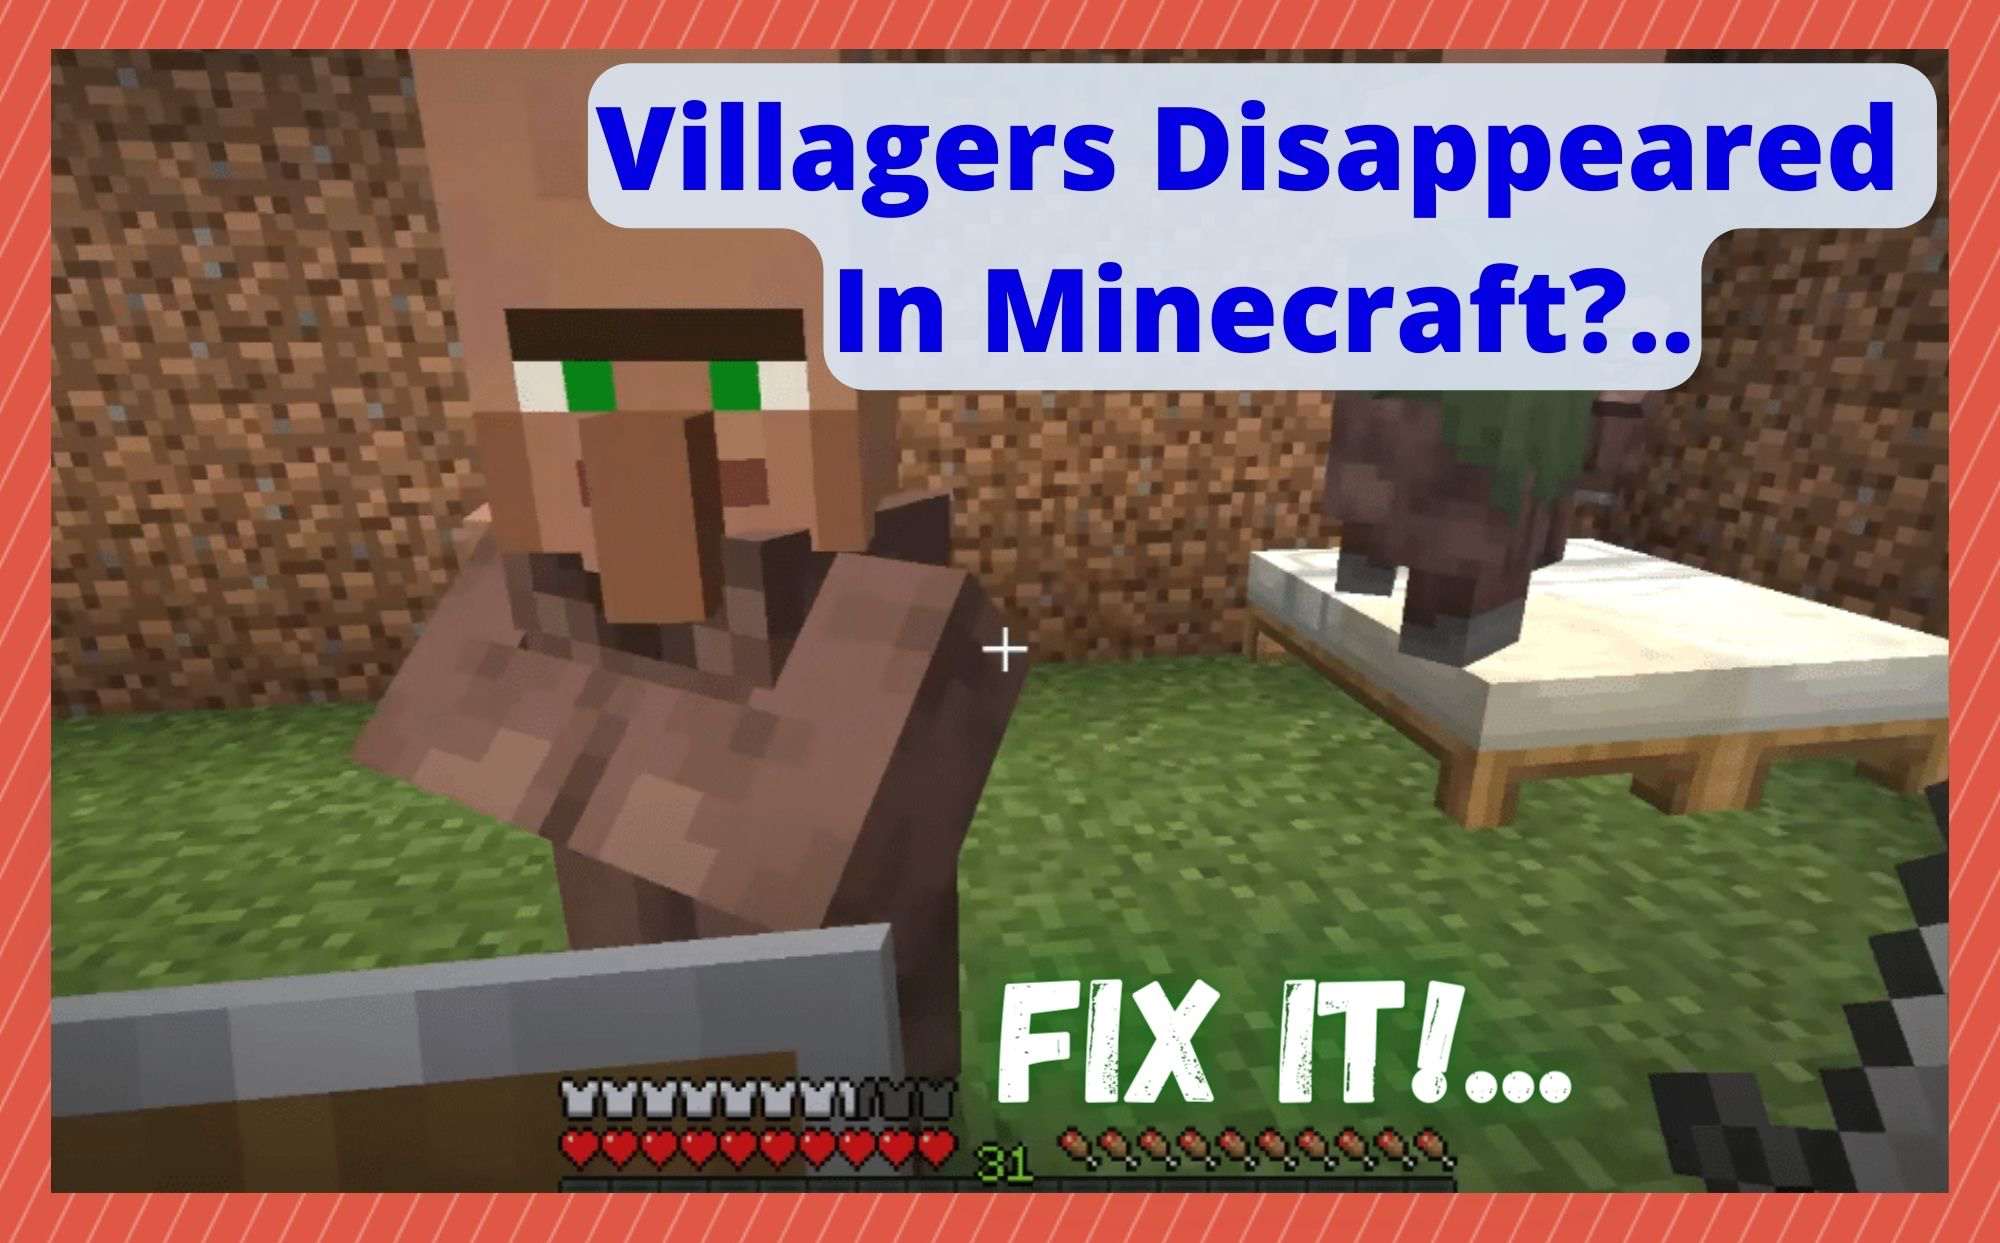 6 Ways To Fix Villagers Disappeared In Minecraft - West Games